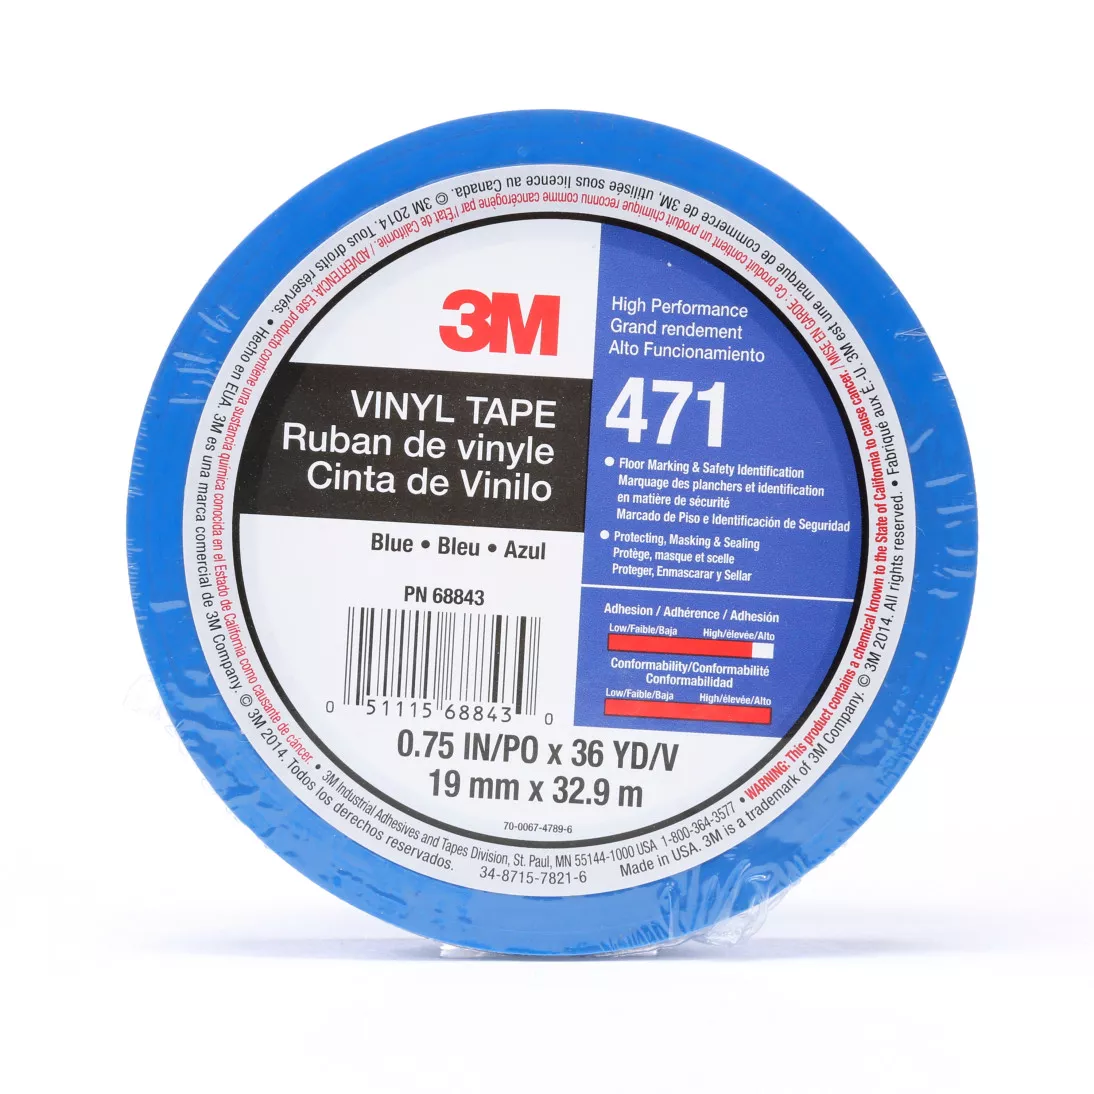 3M™ Vinyl Tape 471, Blue, 3/4 in x 36 yd, 5.2 mil, 48 rolls per case,
Individually Wrapped Conveniently Packaged